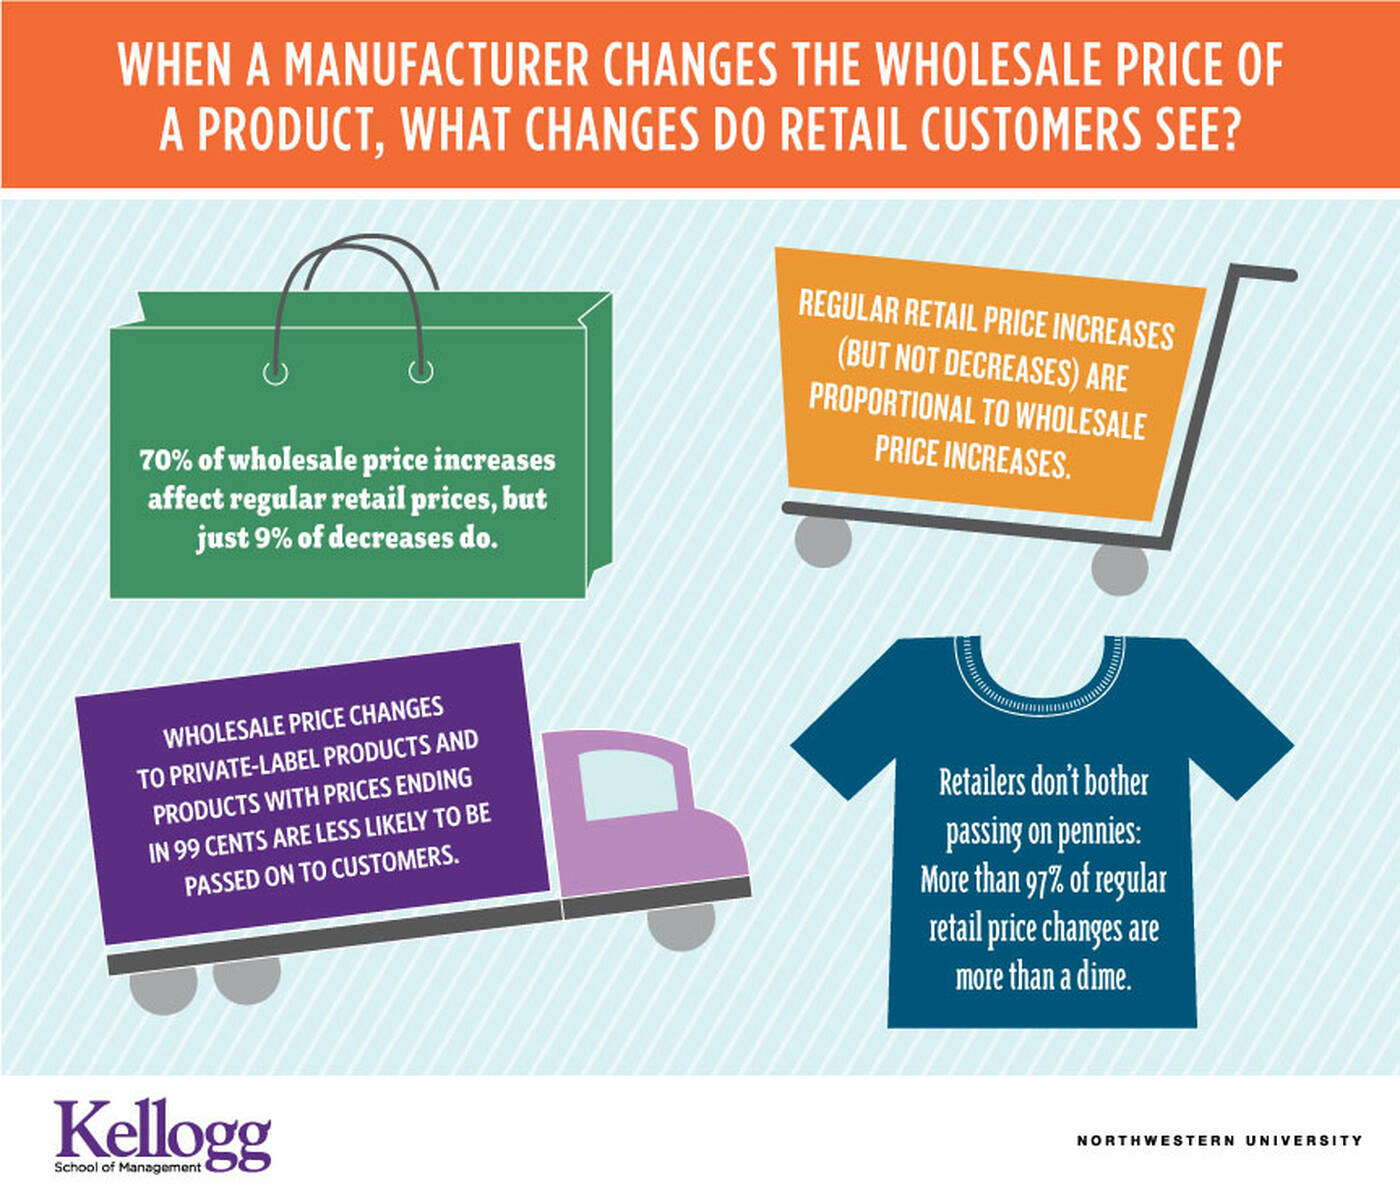 How wholesale price changes pass through to retail prices.